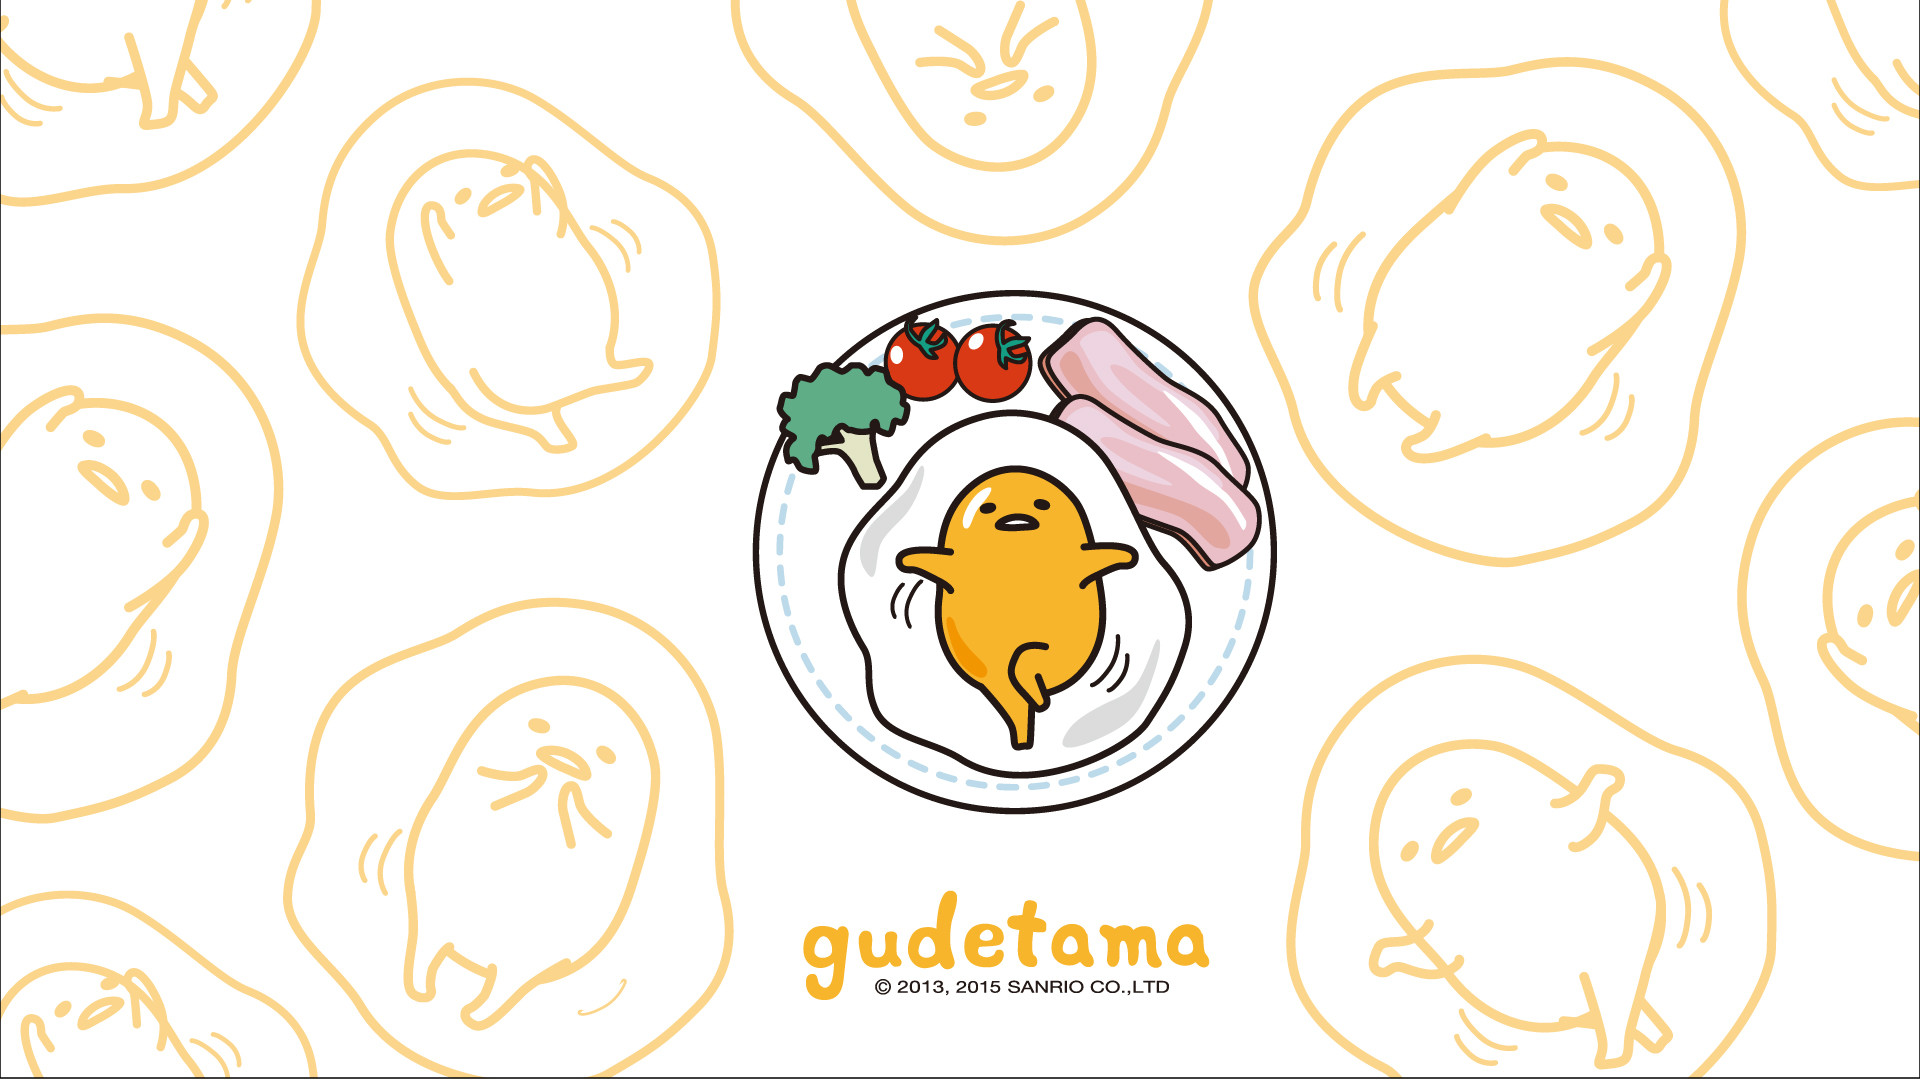 1920x1080 It was shared by Logah who also sell a Gudetama laptop!